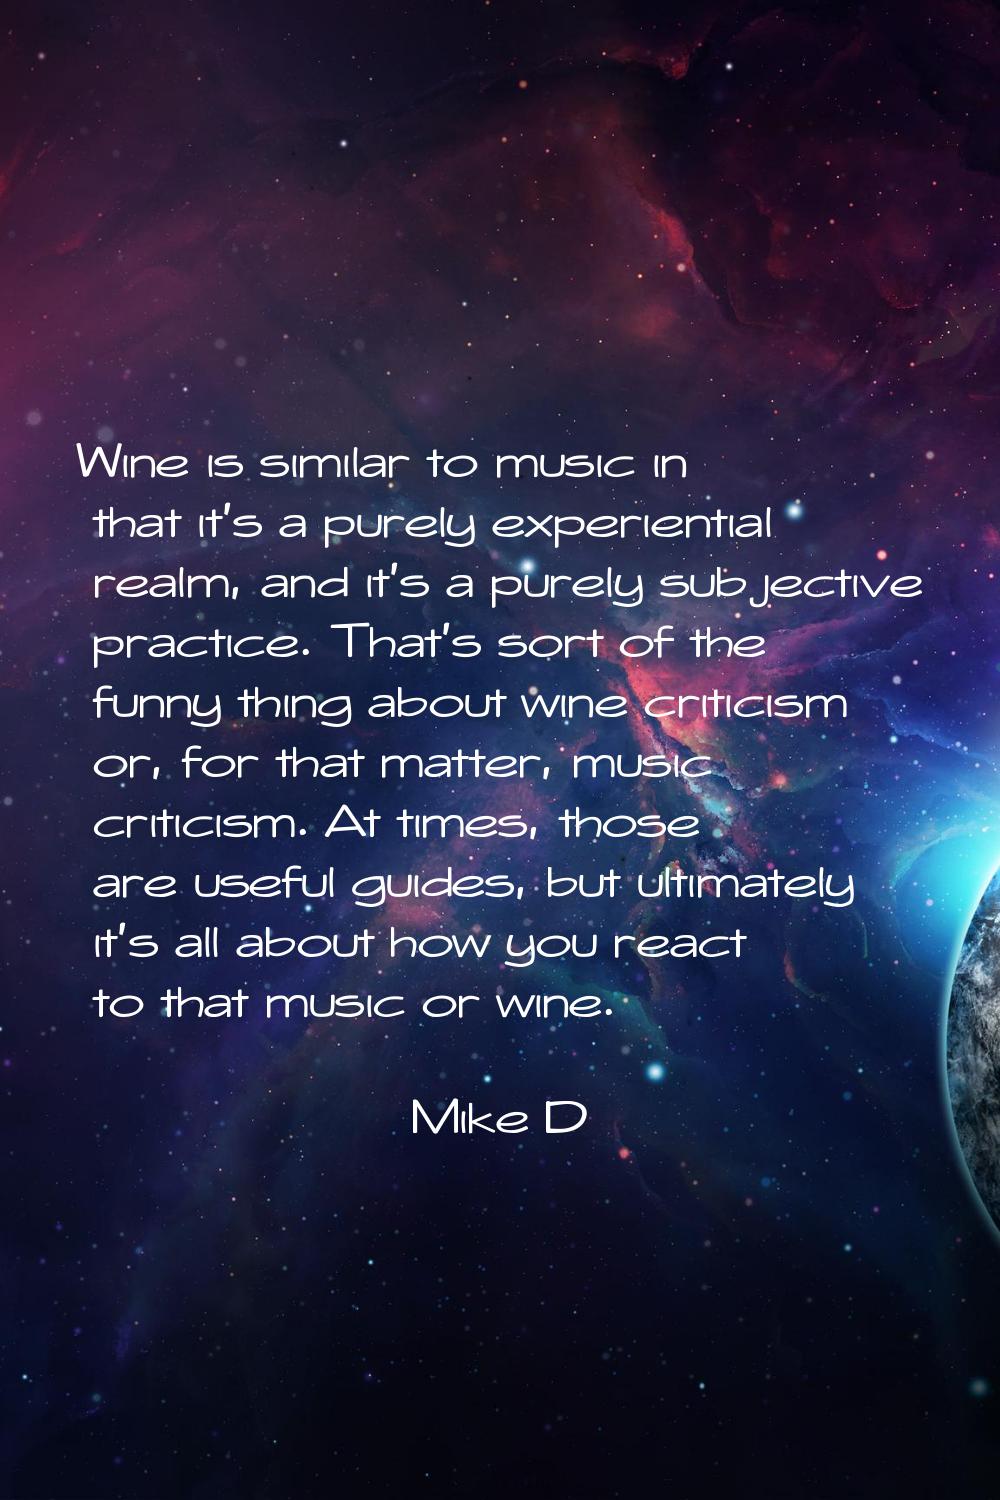 Wine is similar to music in that it's a purely experiential realm, and it's a purely subjective pra